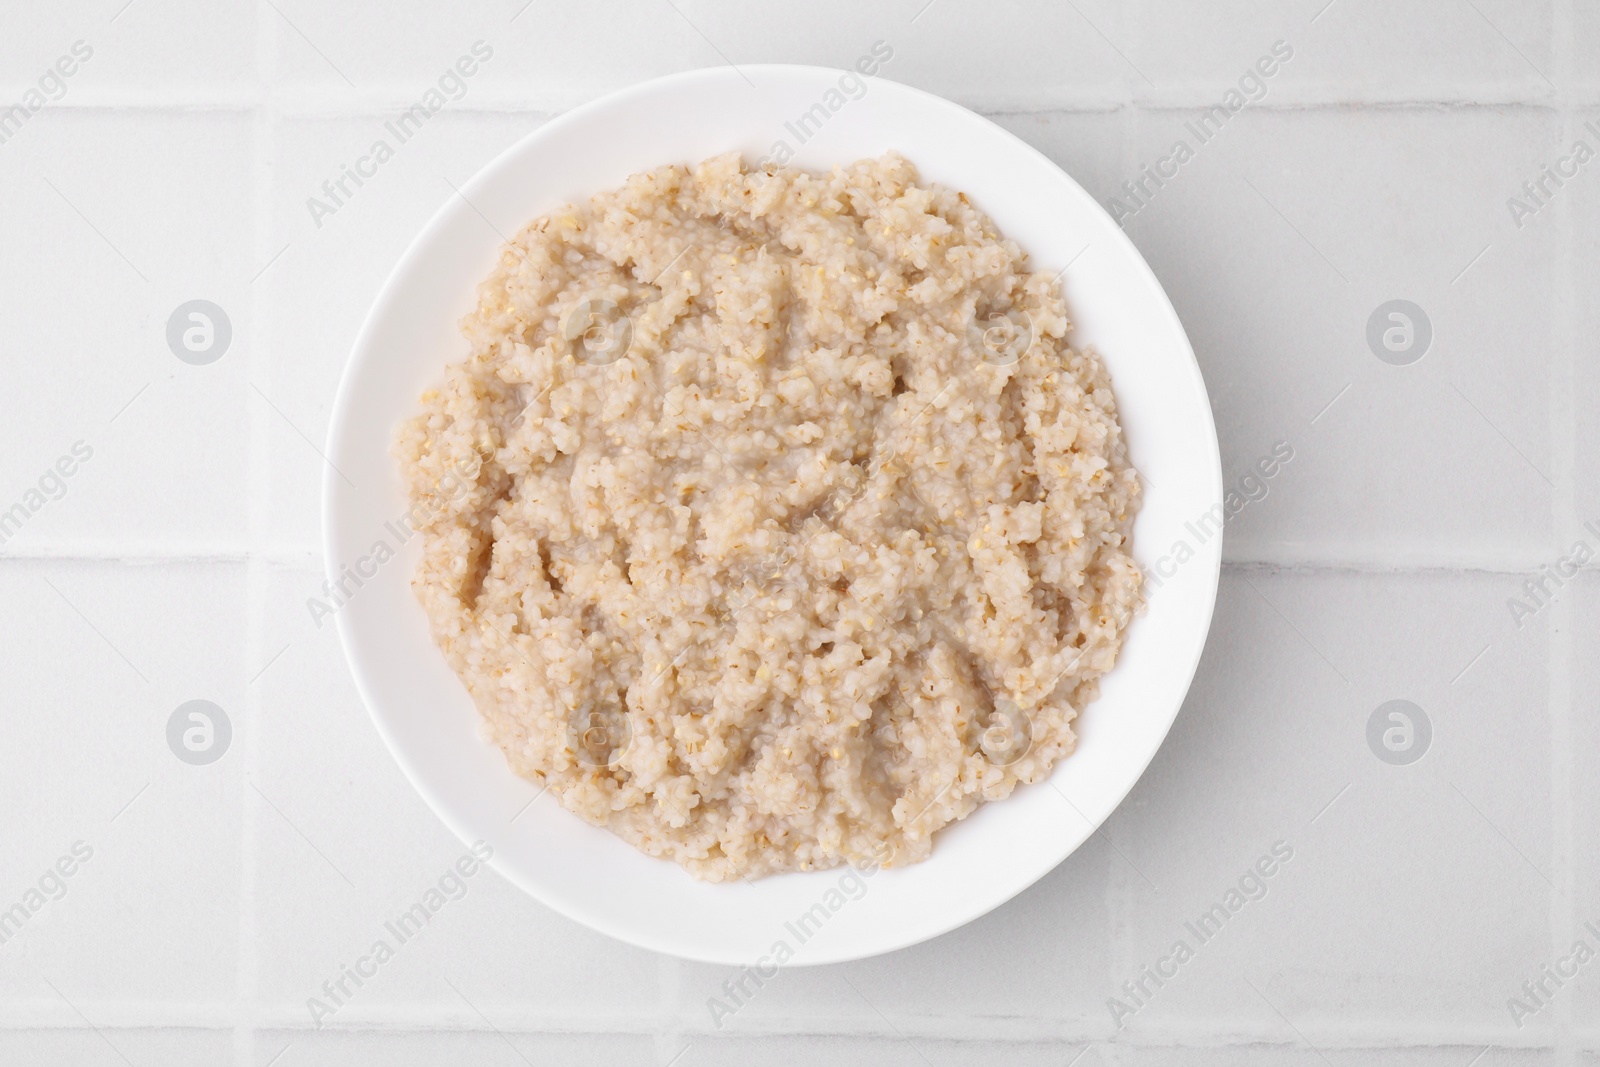 Photo of Delicious barley porridge in bowl on white tiled table, top view